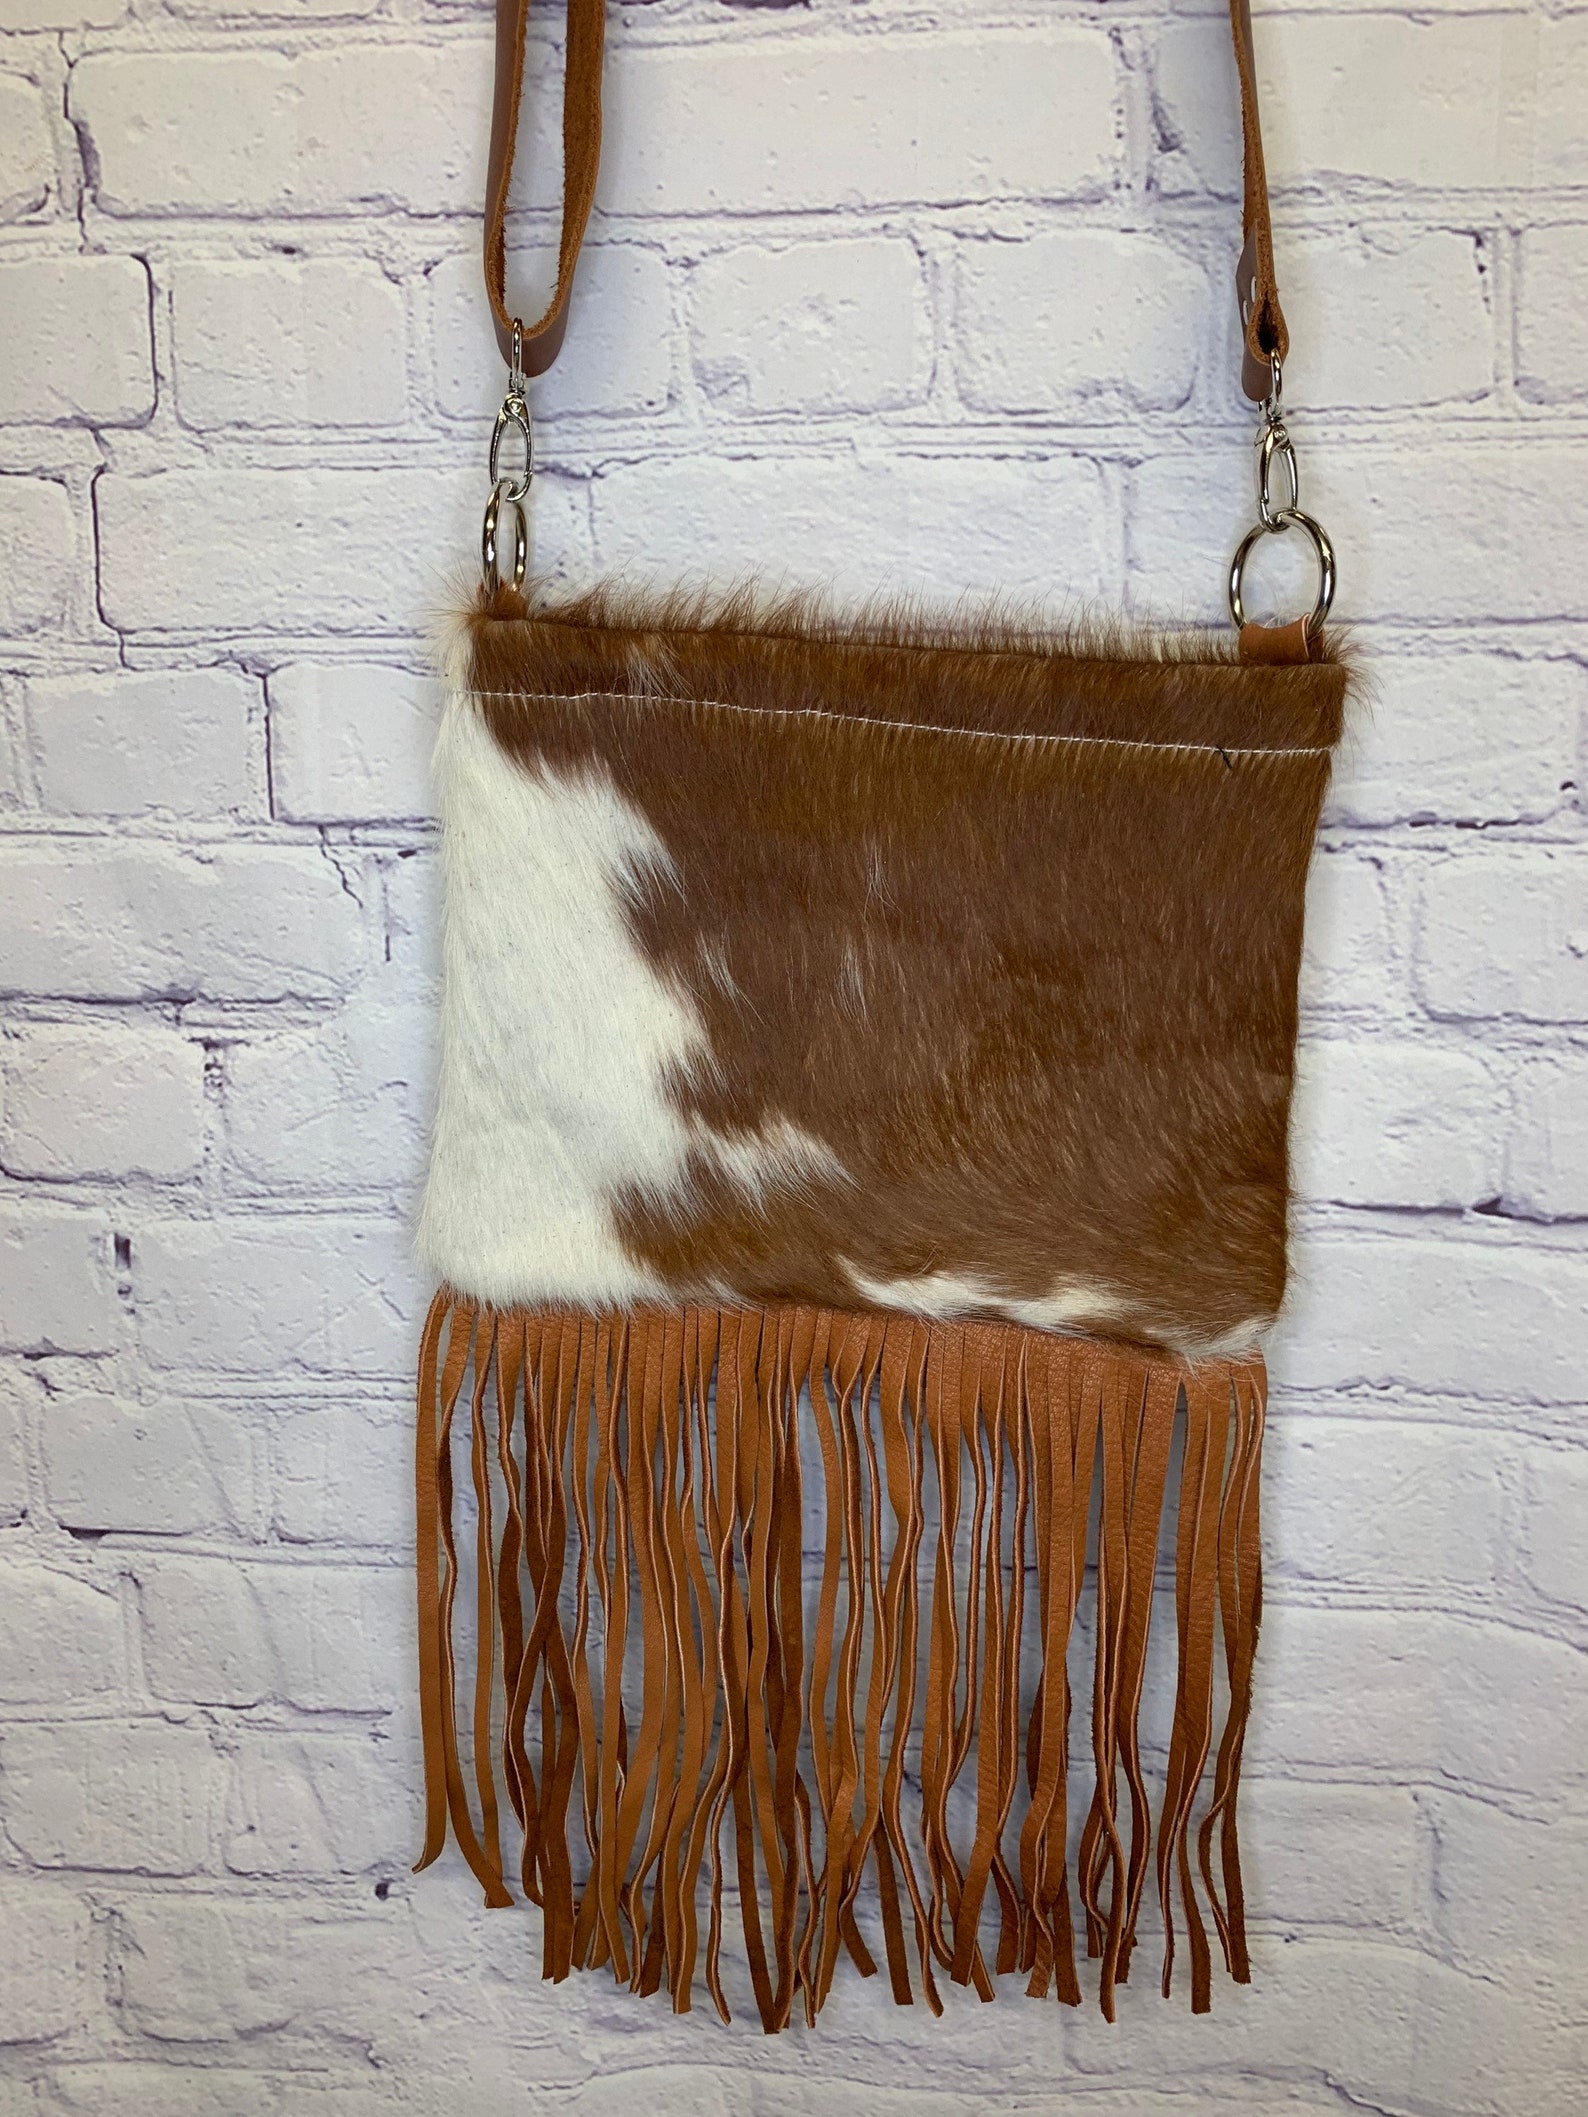 Hair on hide and leather with fringe crossbody bag | Etsy